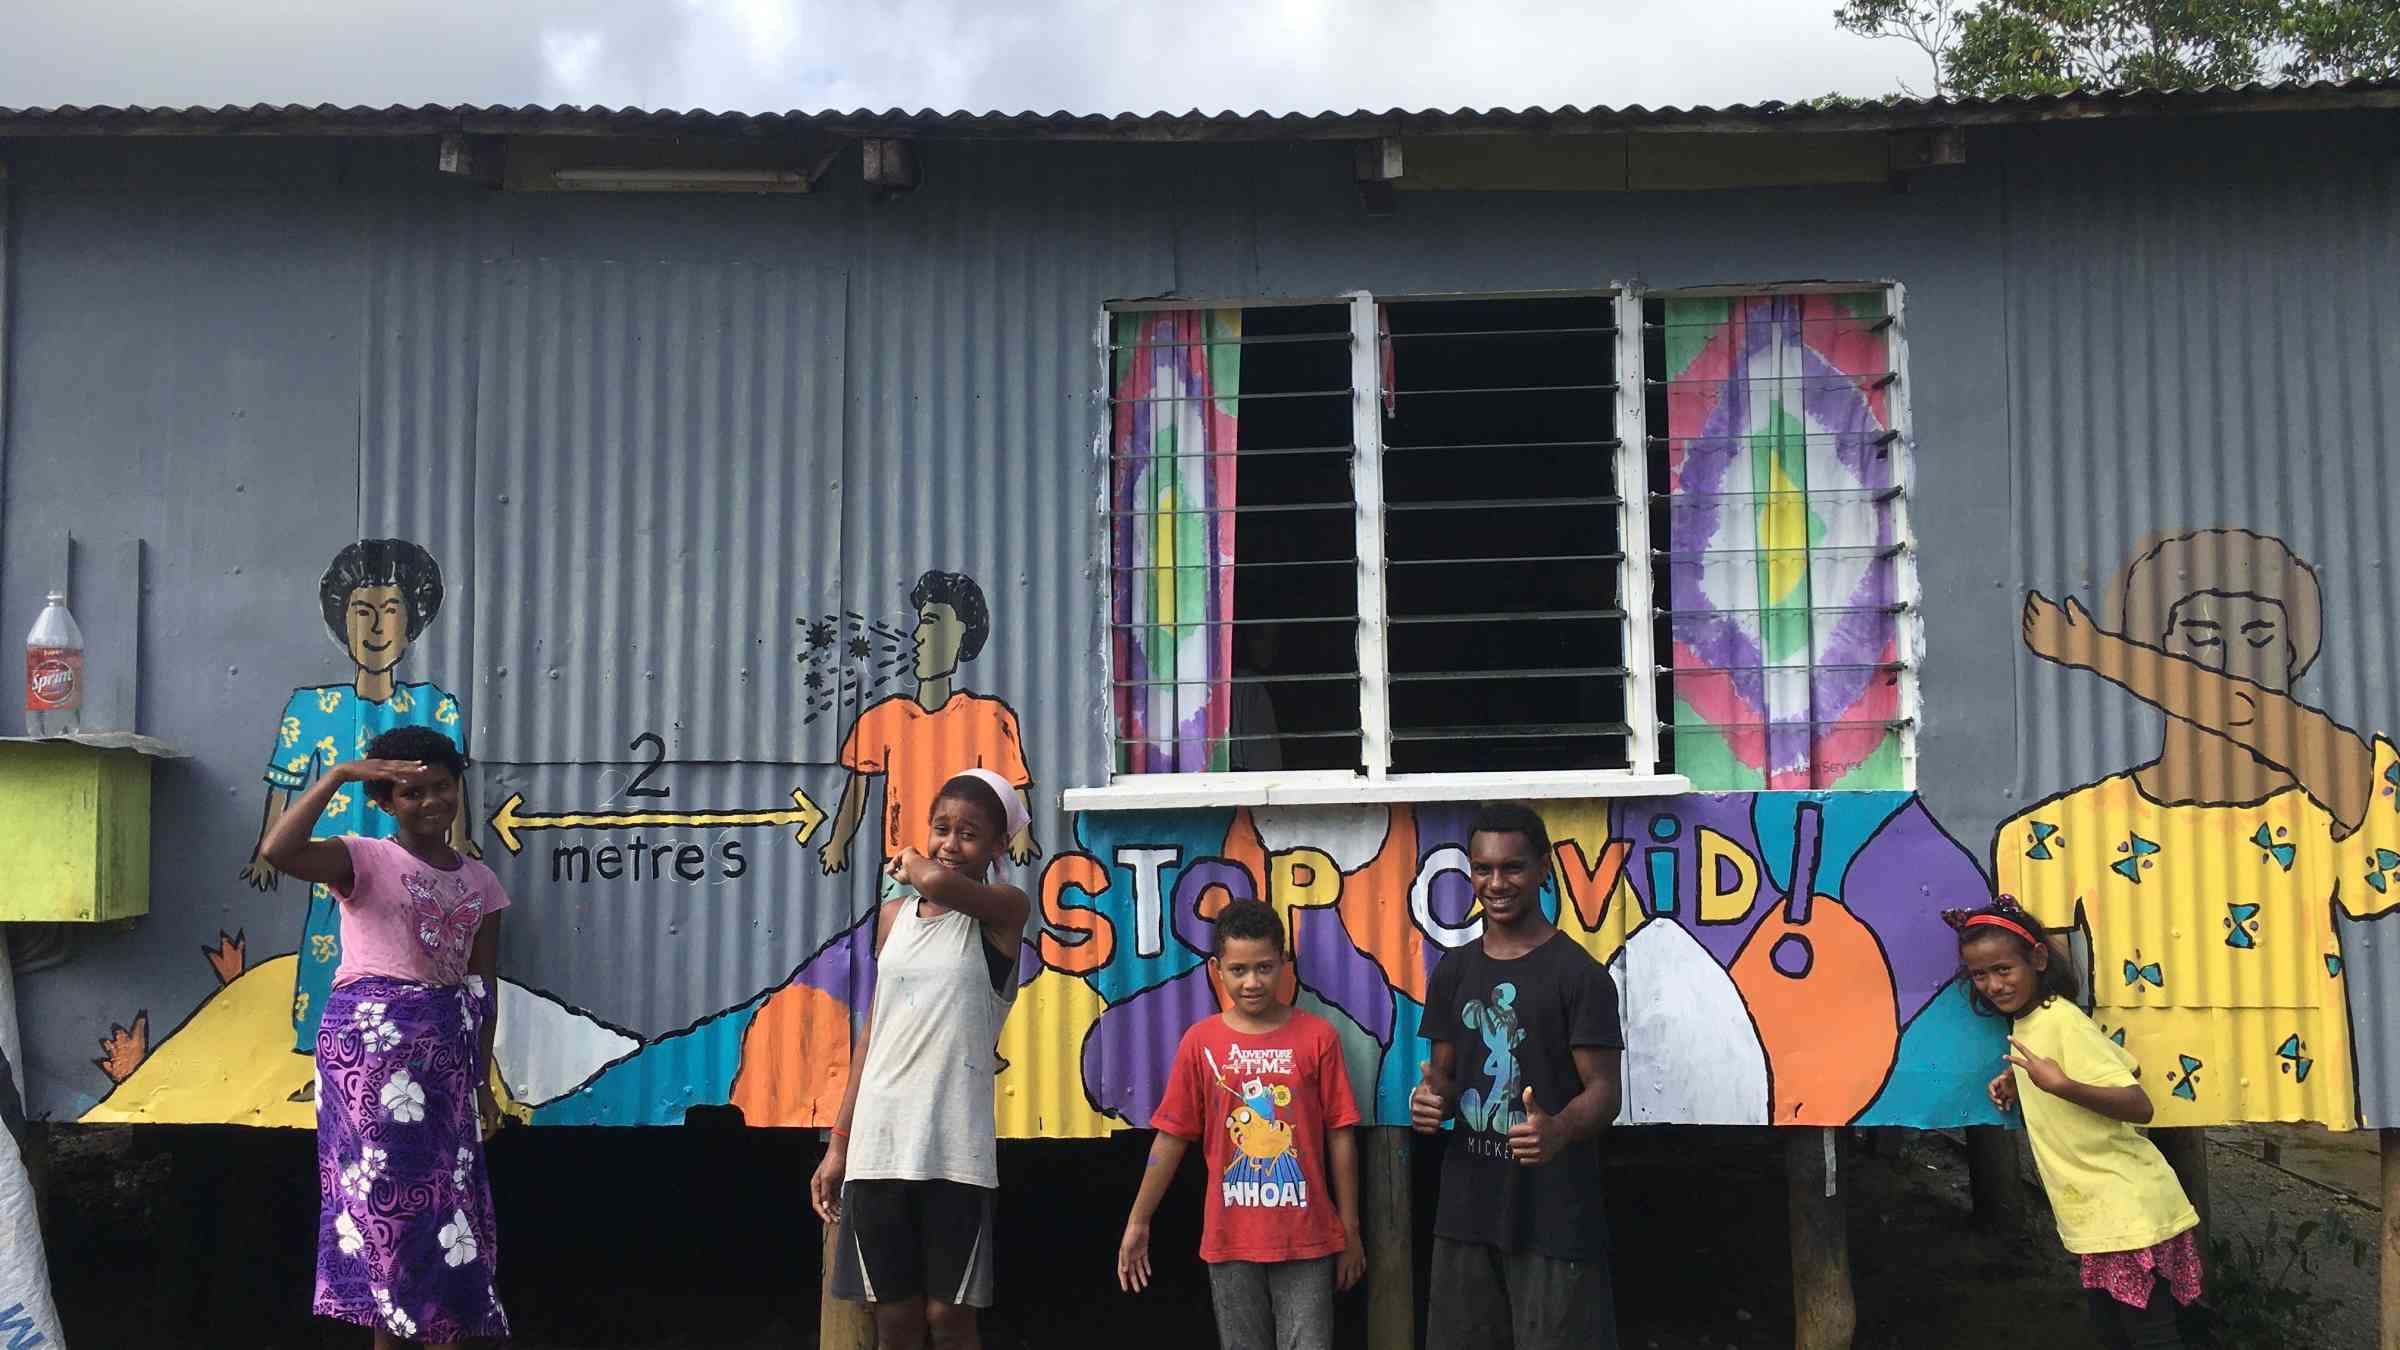 Youth and a COVID-19 awareness mural, Fiji